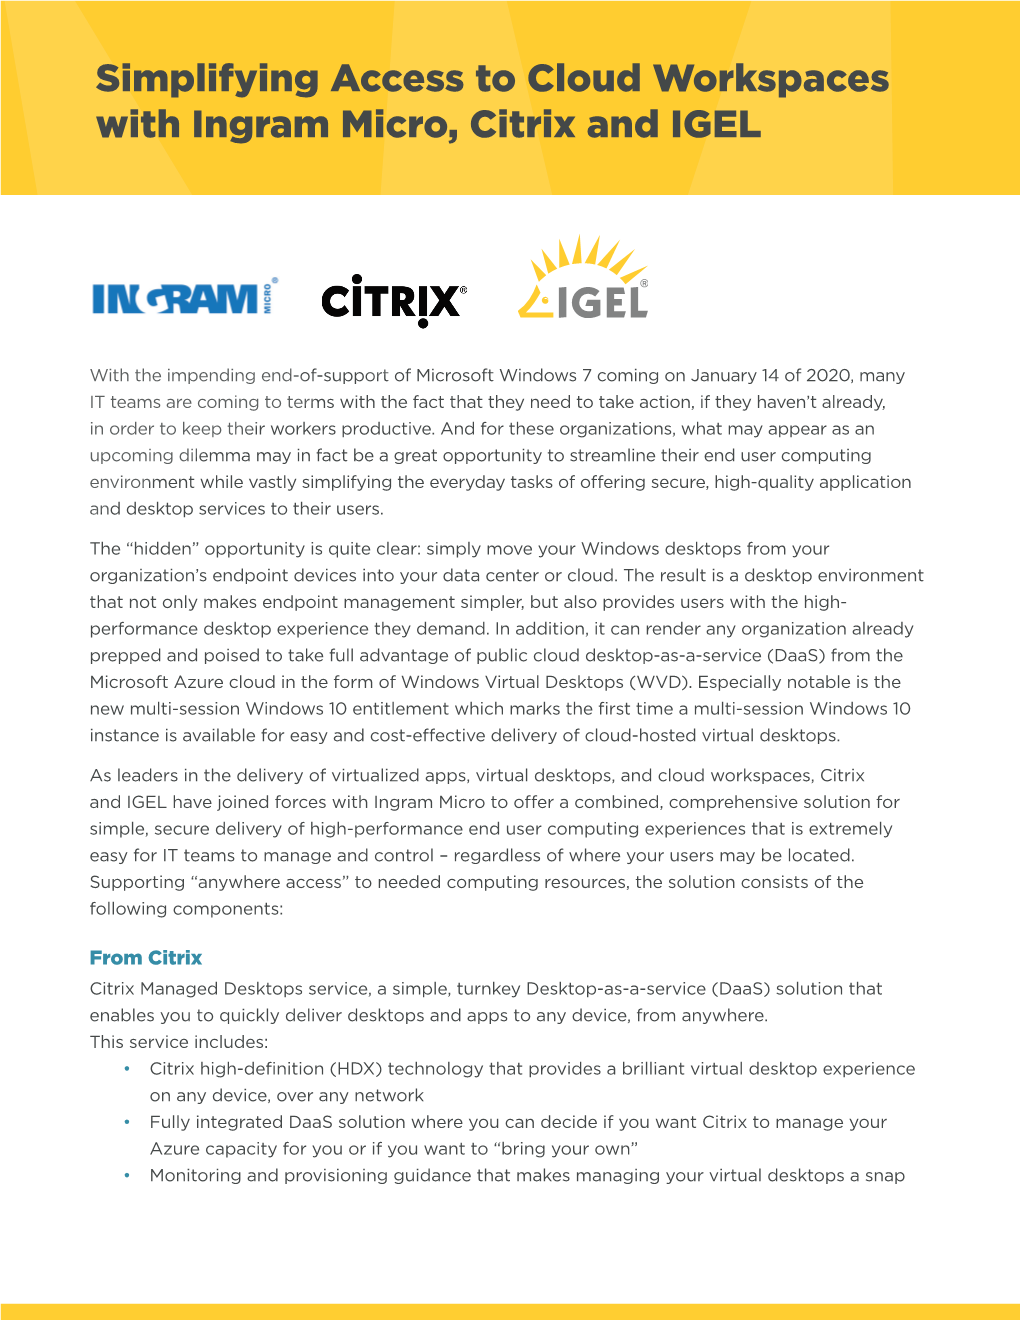 Simplifying Access to Cloud Workspaces with Ingram Micro, Citrix and IGEL